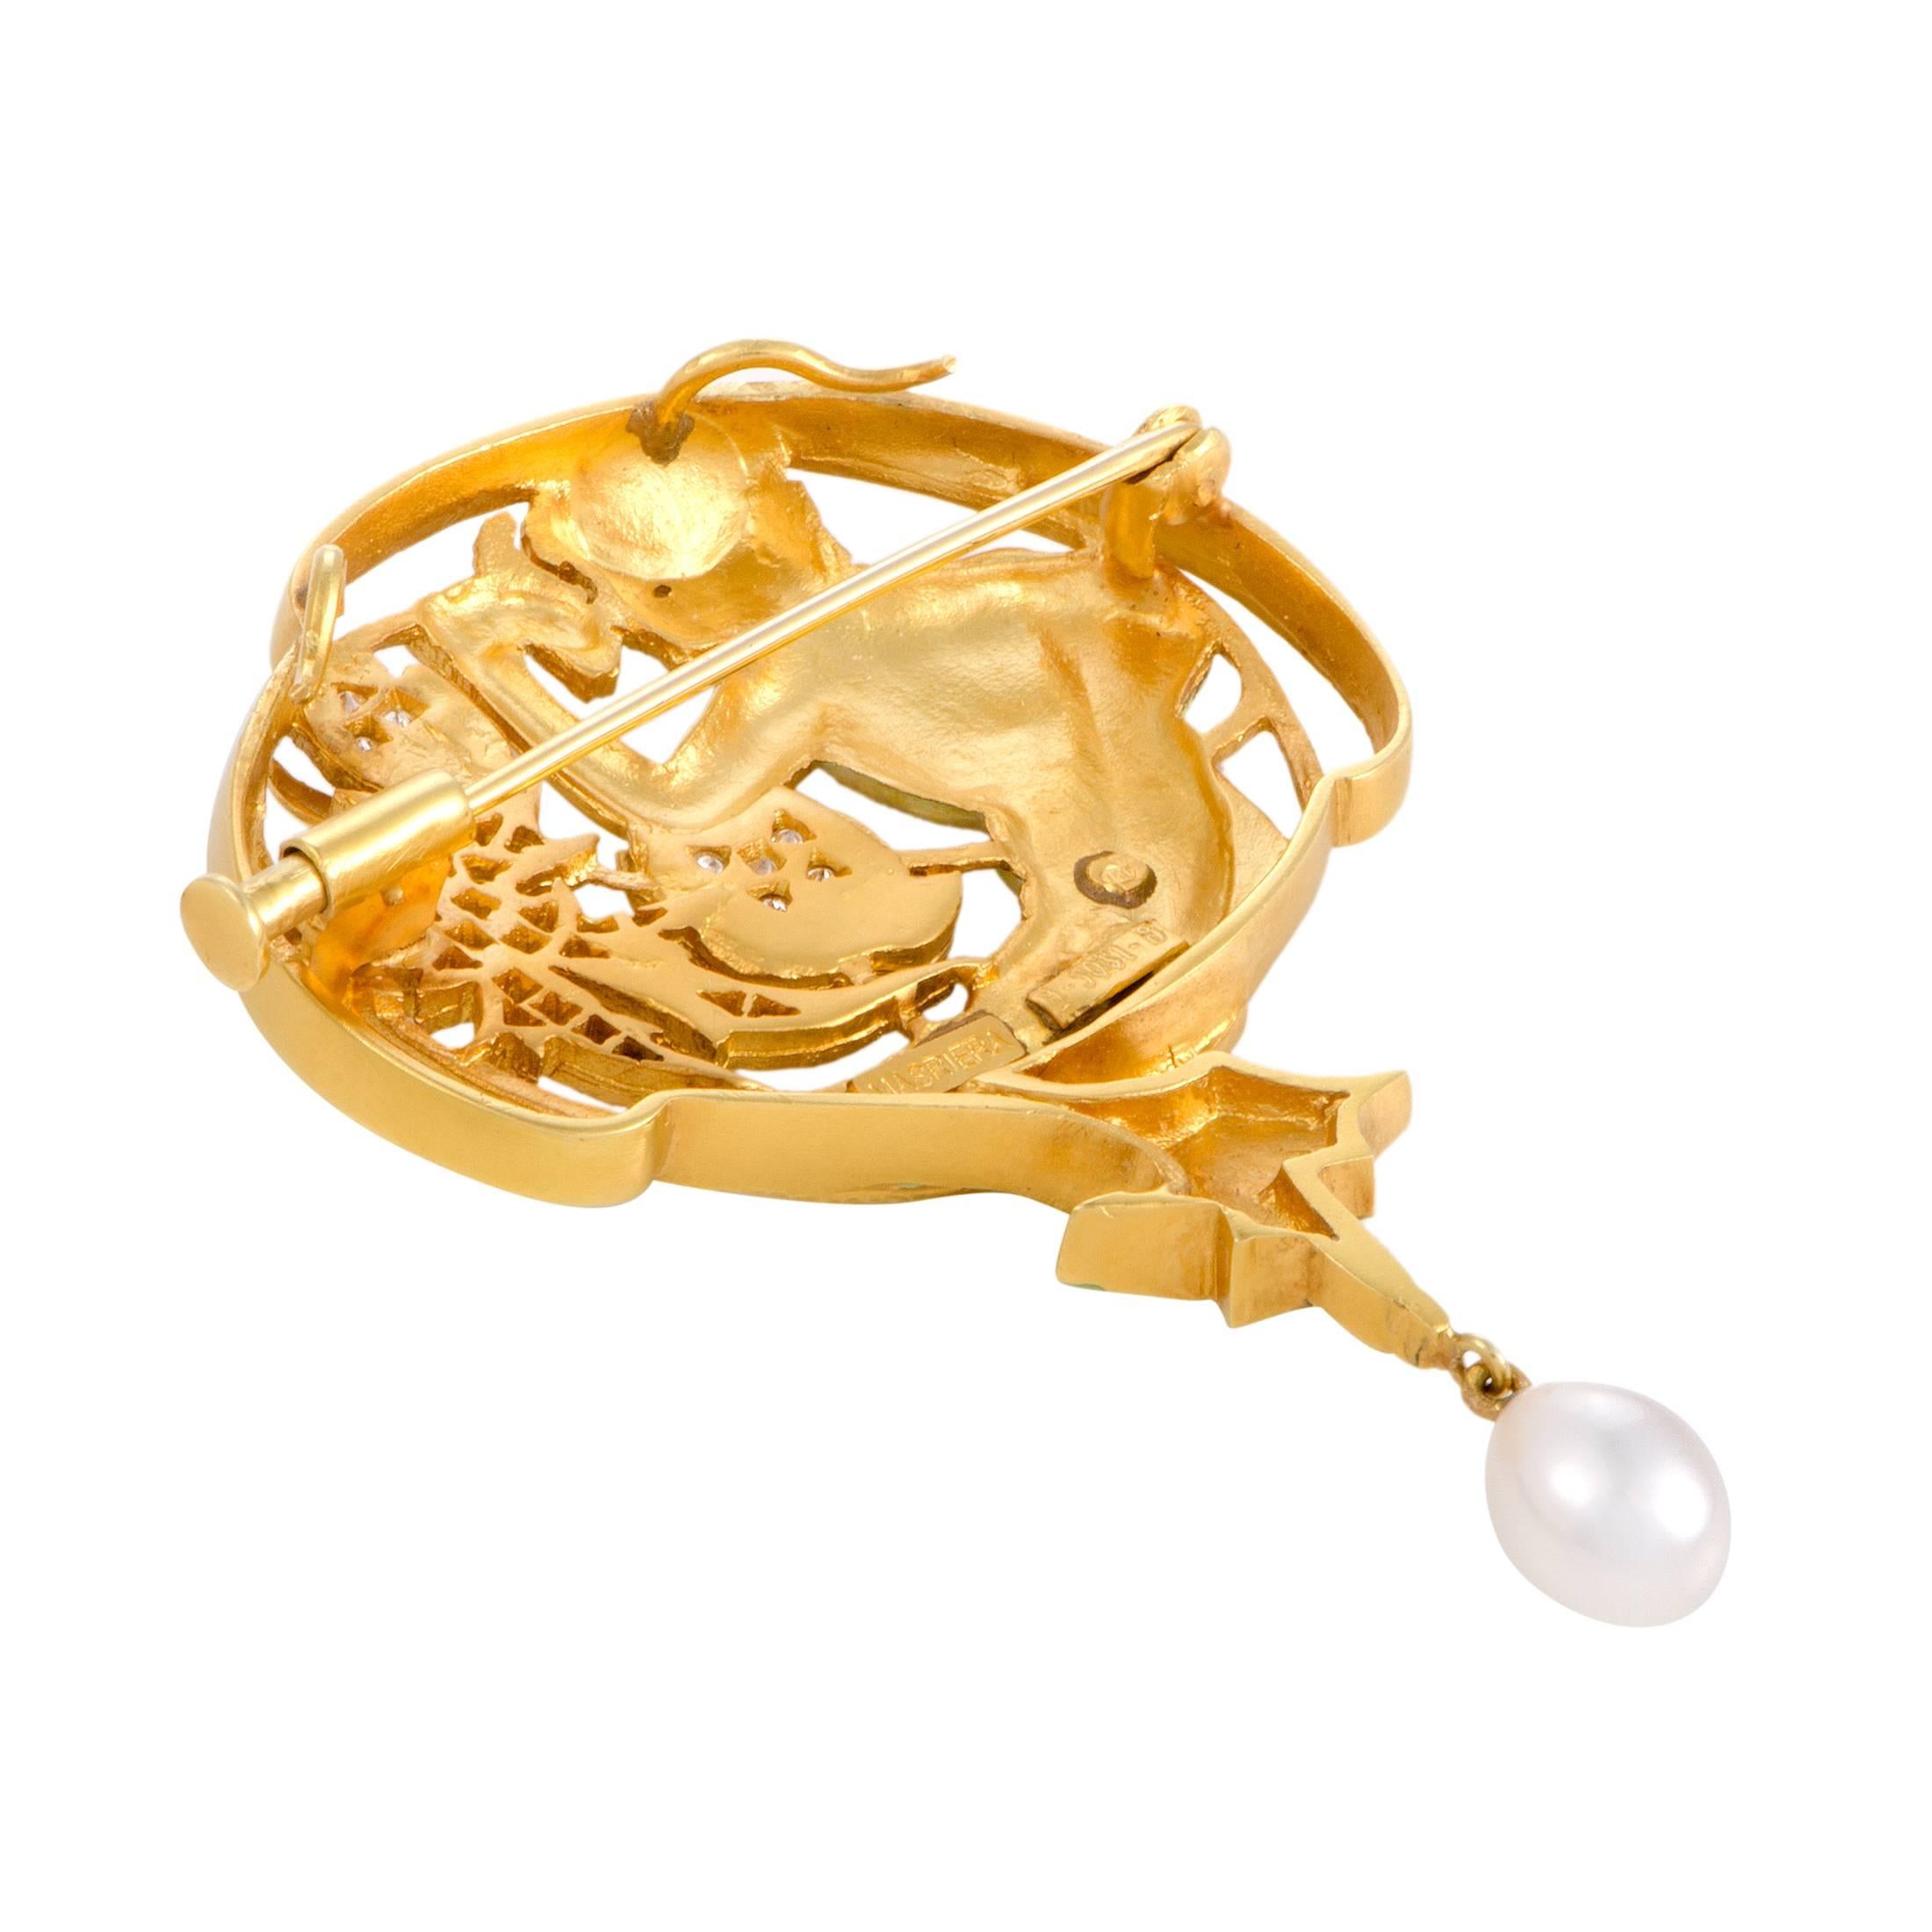 Presented by Masriera, this stunning brooch features a wonderfully offbeat design, offering an exceptionally graceful, feminine appearance. The brooch is made of 18K yellow gold and decorated with a sublime combination of enamel and diamonds,